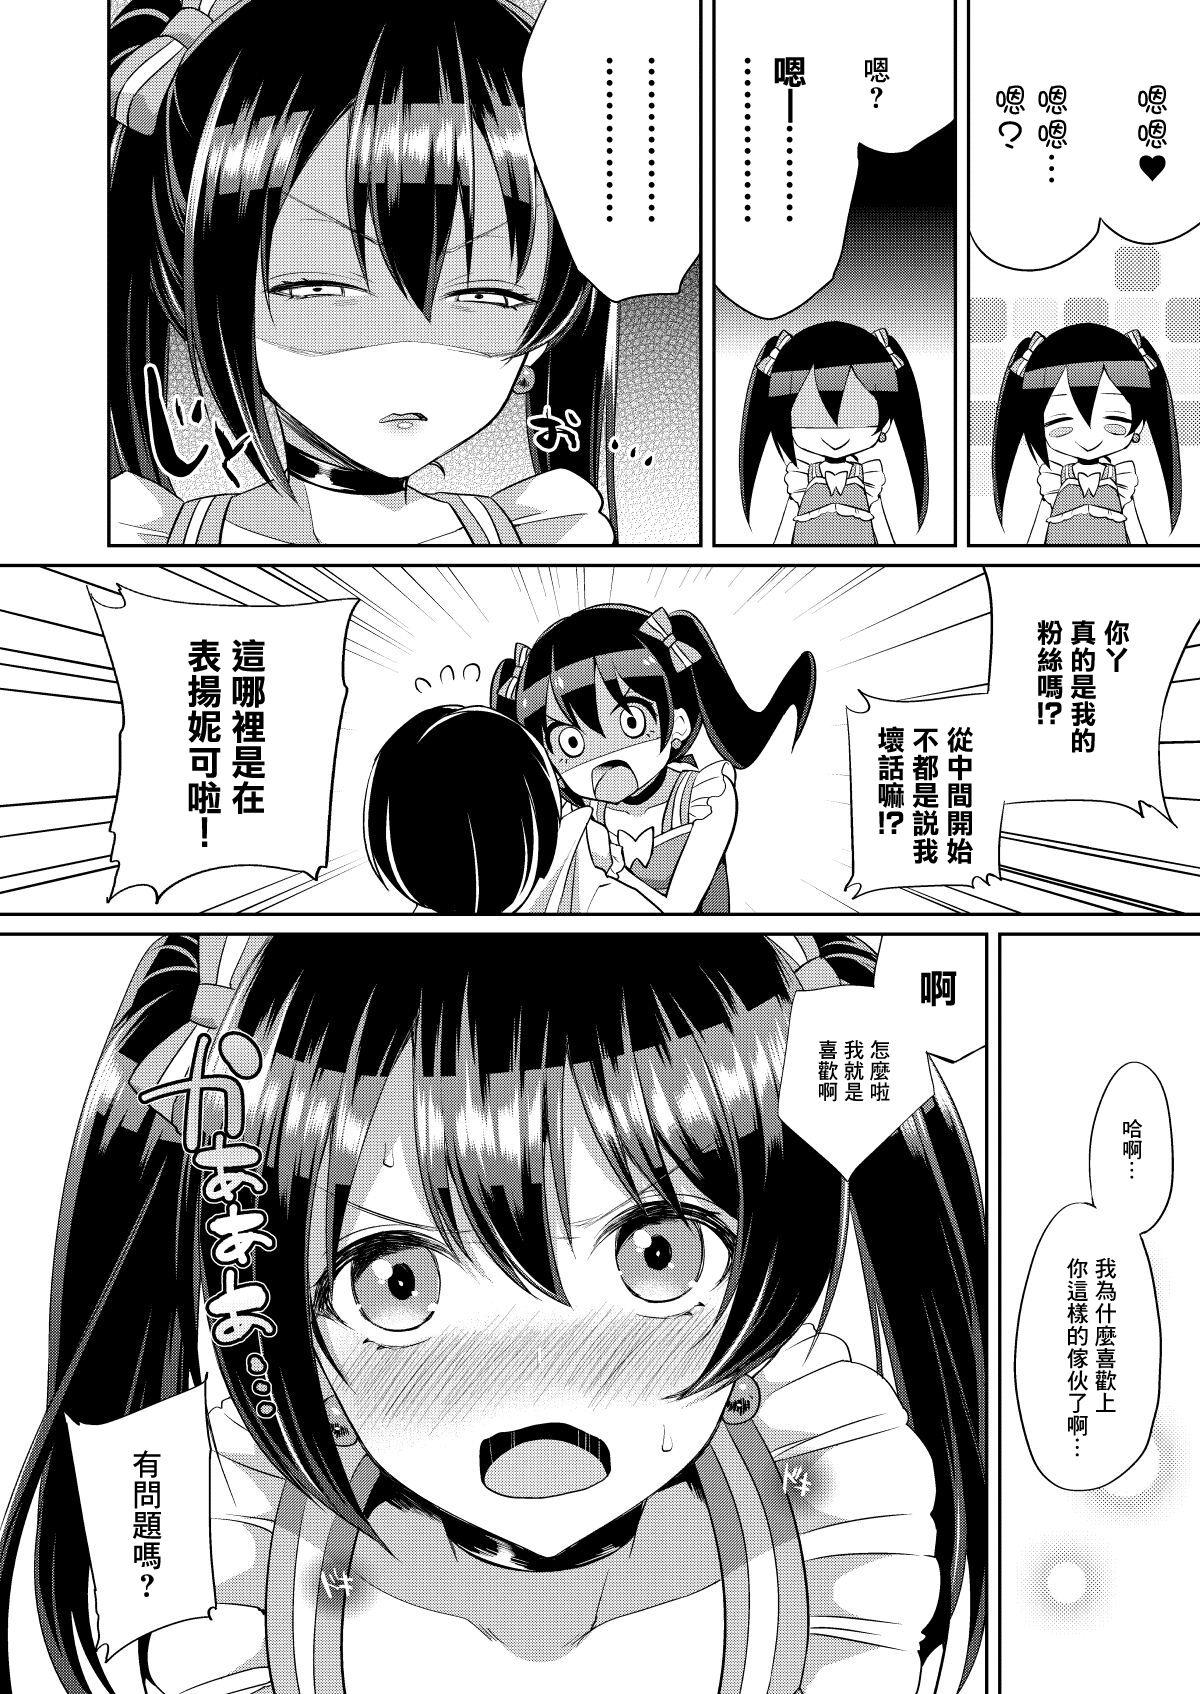 Ass にこといちゃラブエッチ - Love live Riding Cock - Page 2